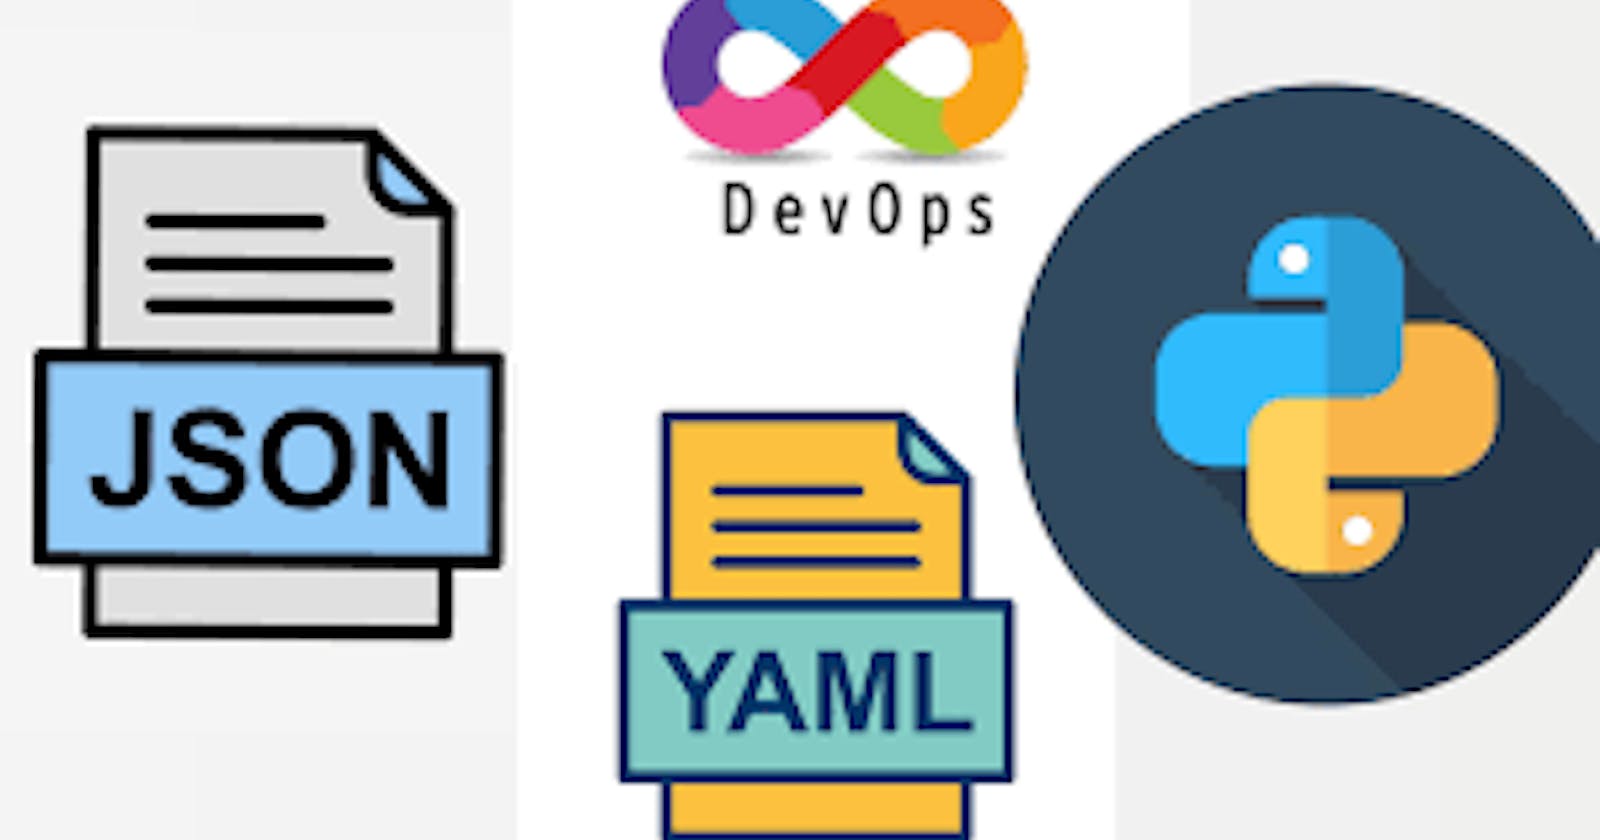 Python Libraries for DevOps, Reading JSON and YAML in Python